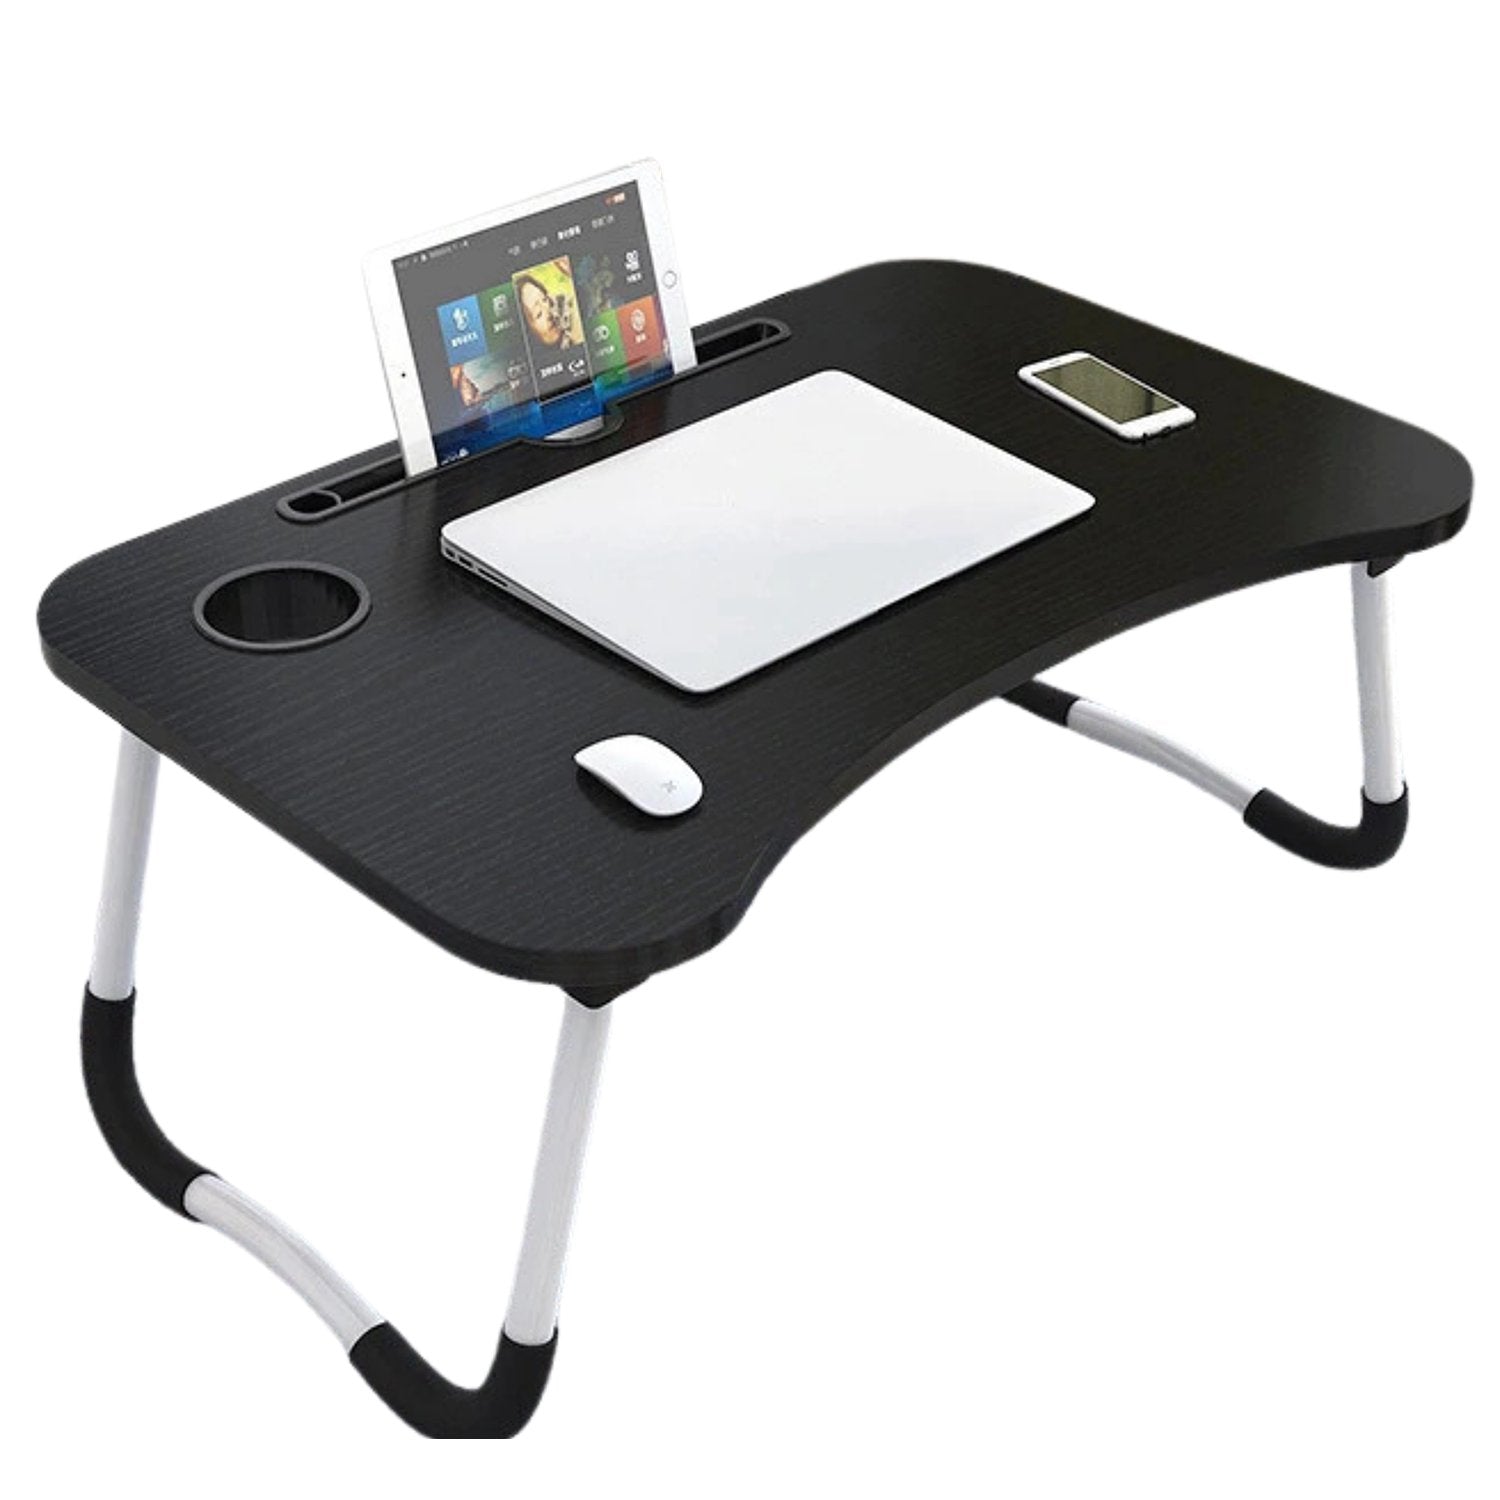 8008 Foldable Laptop Table,Computer Stand Reading Holder for Couch Floor, Black